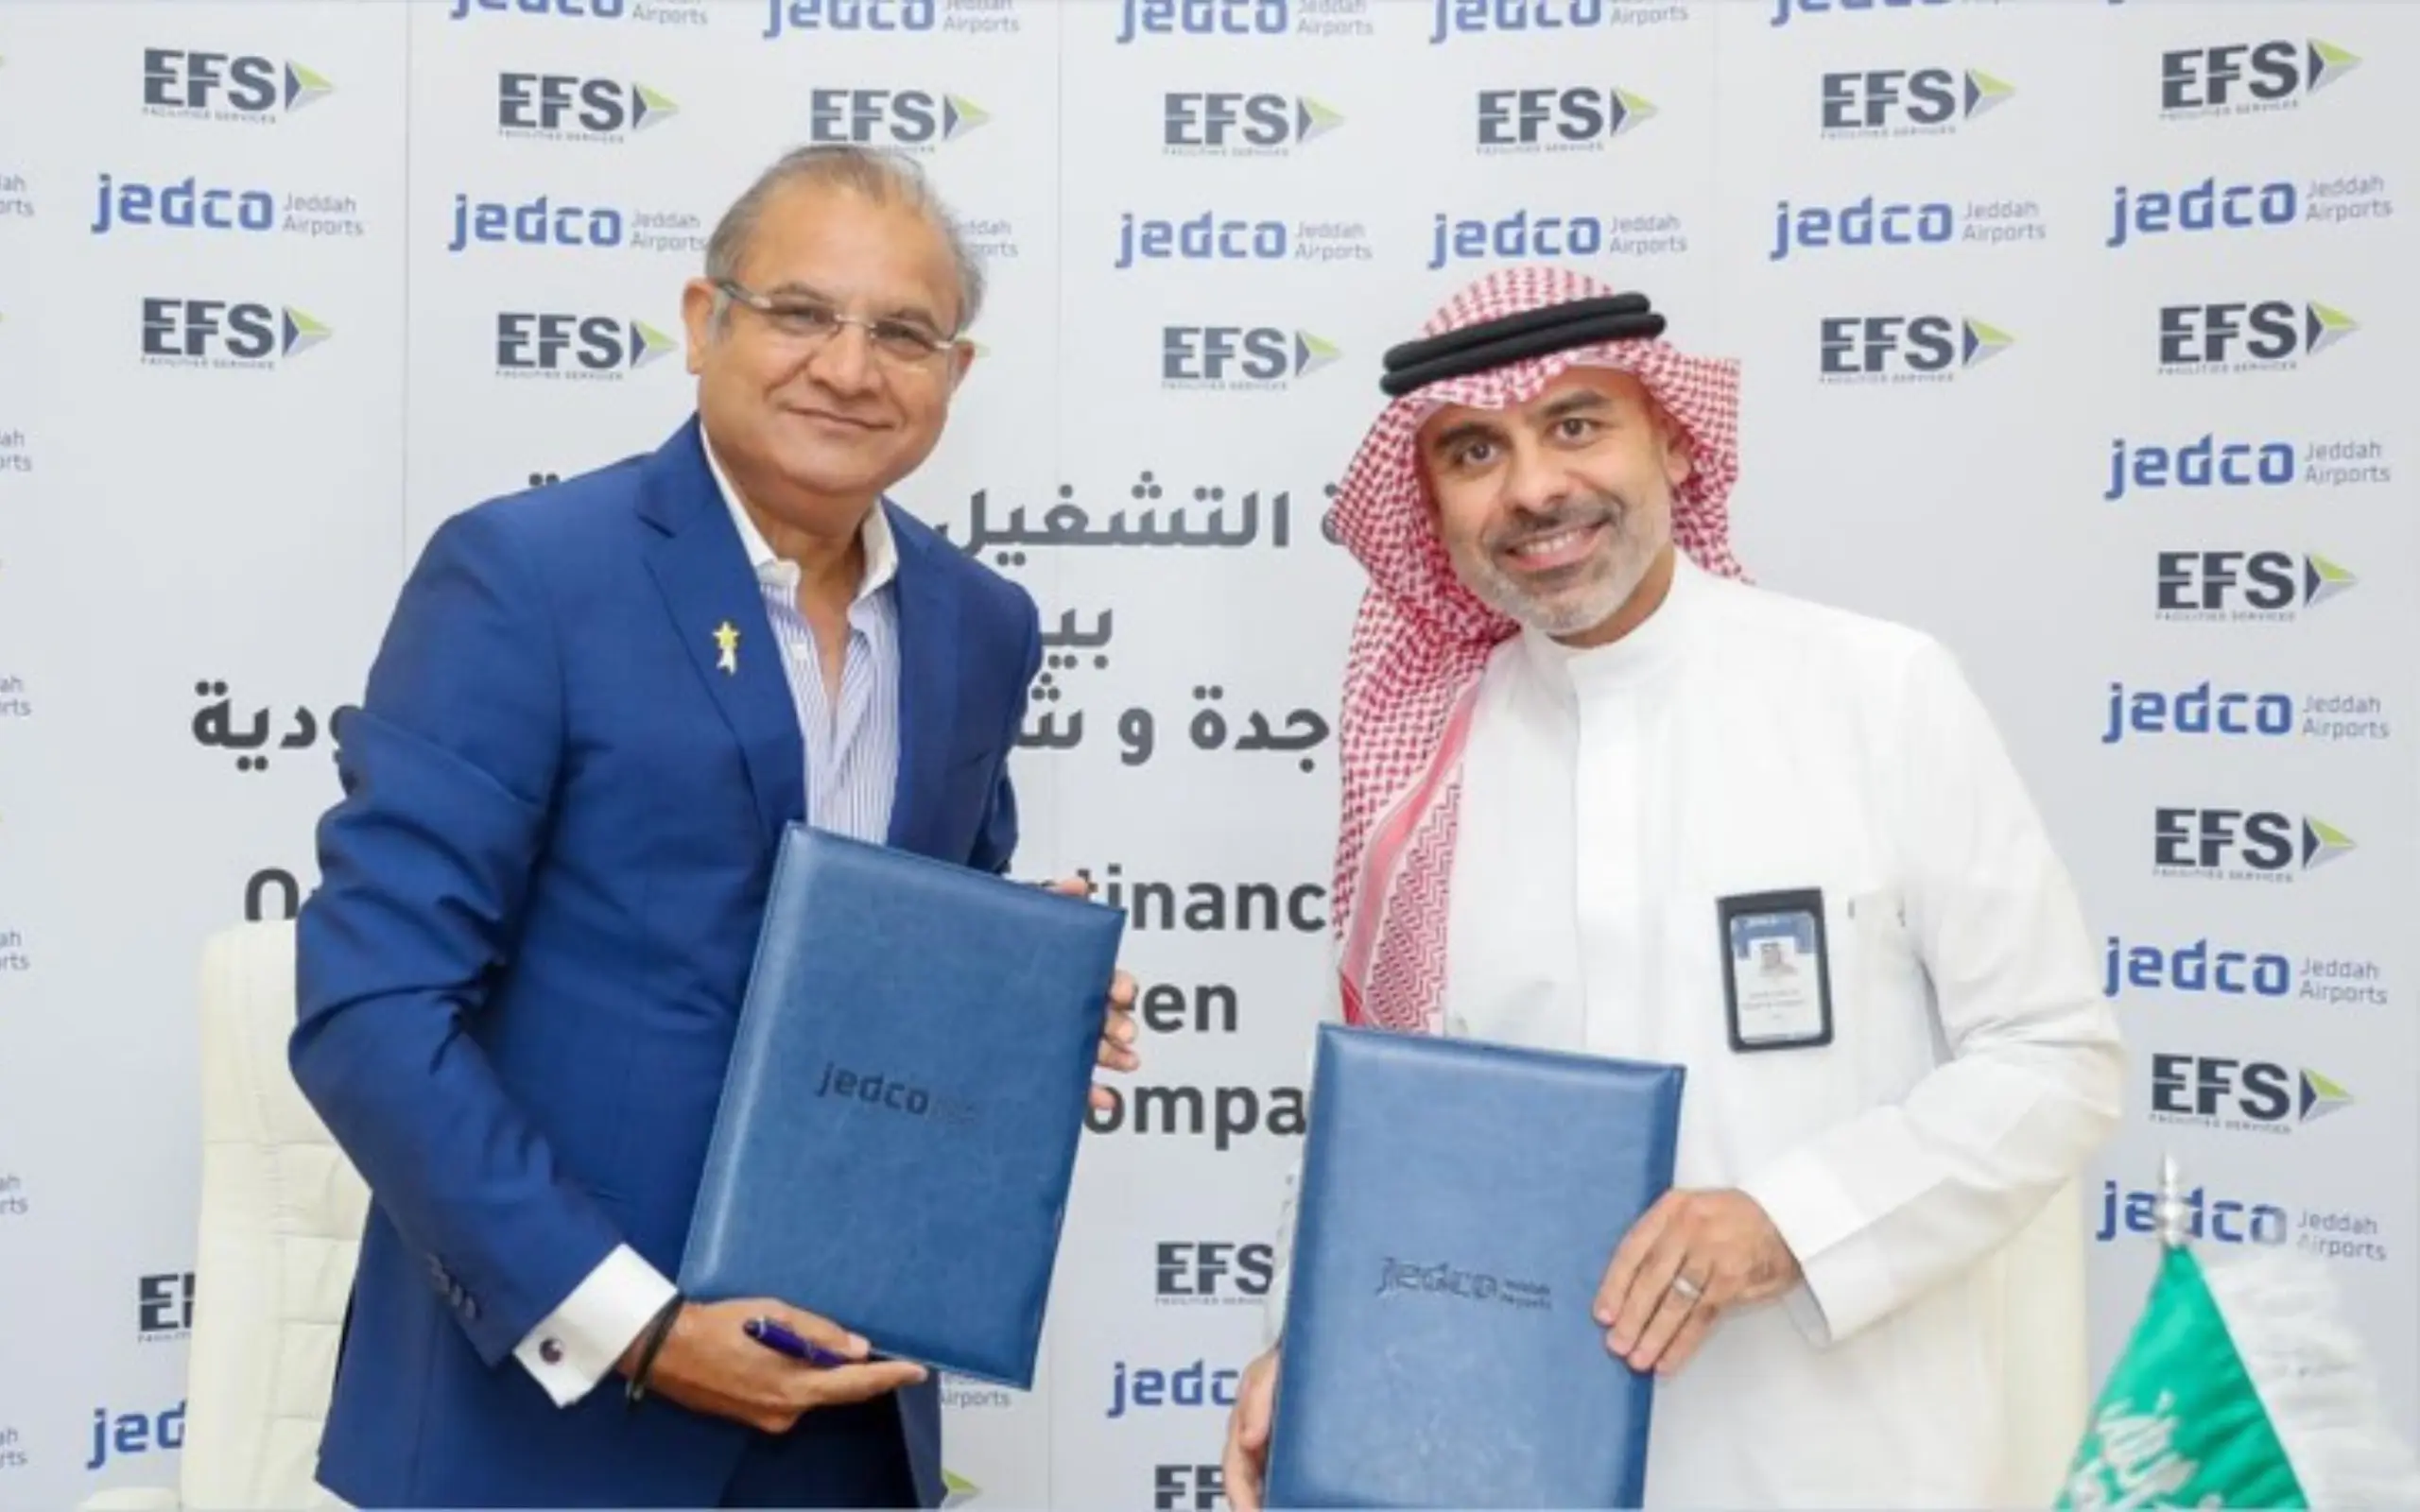 EFS-crosses-1-billion-AED-in-new-project-wins-in-the-first-quarter-of-2022